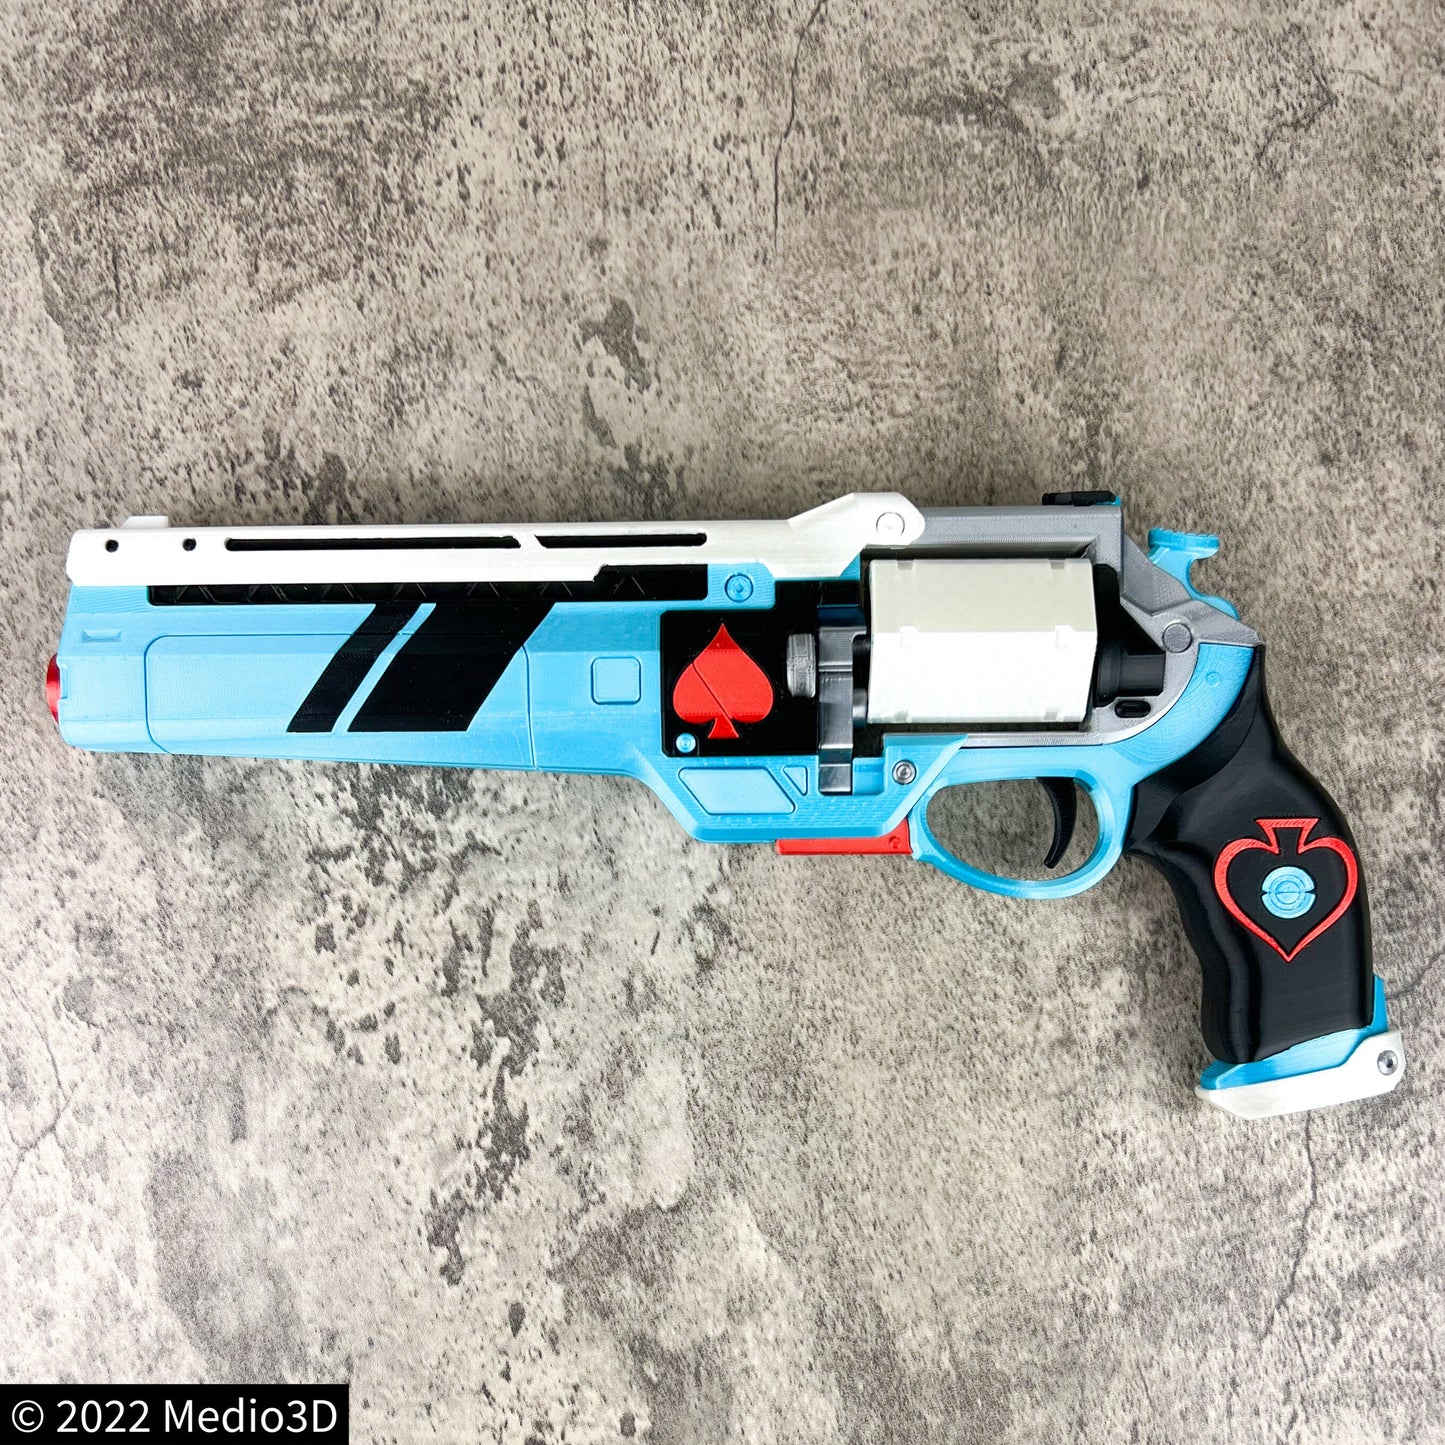 Vanguard Dare Ace of Spades Hand Cannon Props Cosplay, Larp Props, Post Apocalyptic Larp Weapon, Cyberpunk Prop